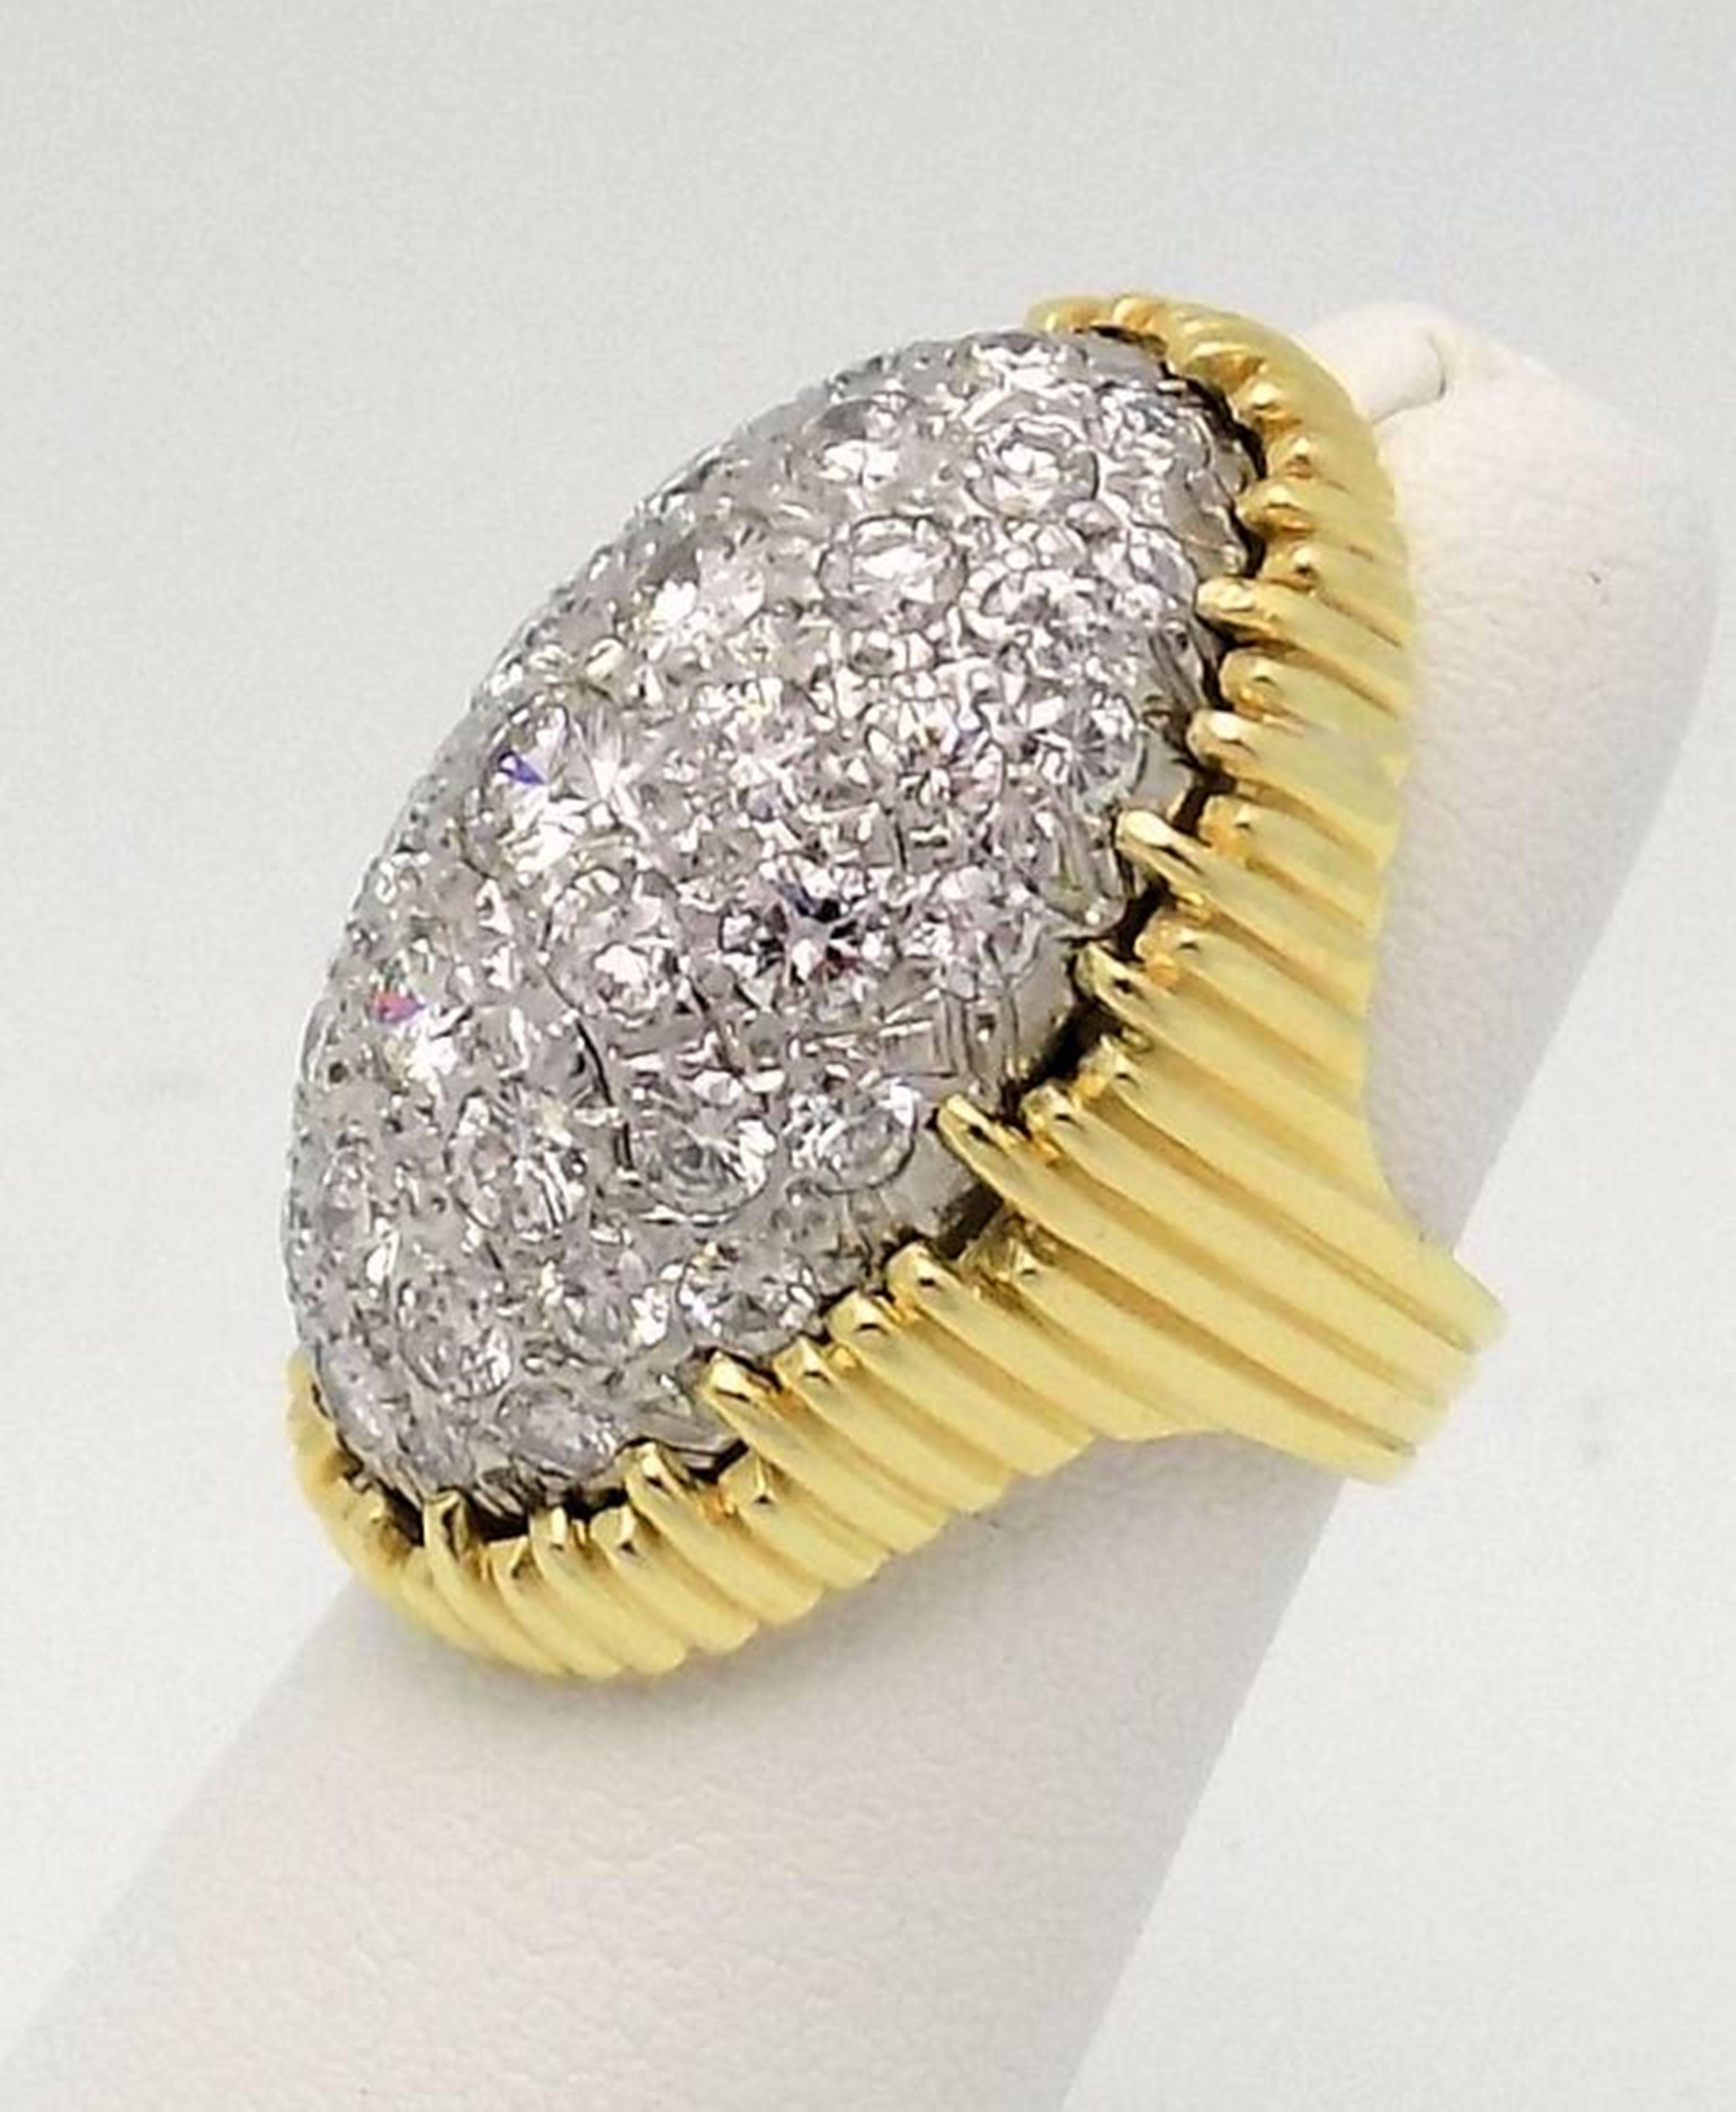 18 Karat Yellow Gold/White Gold Dome Ring with 45 Round Brilliant Diamonds 2.60 Carat Total  Weight VS-2/SI-1, G-H-I. (2 Chipped). Ribbed Design Shank. Finger Size 4.5; 10.2 DWT or 15.86 Grams. 